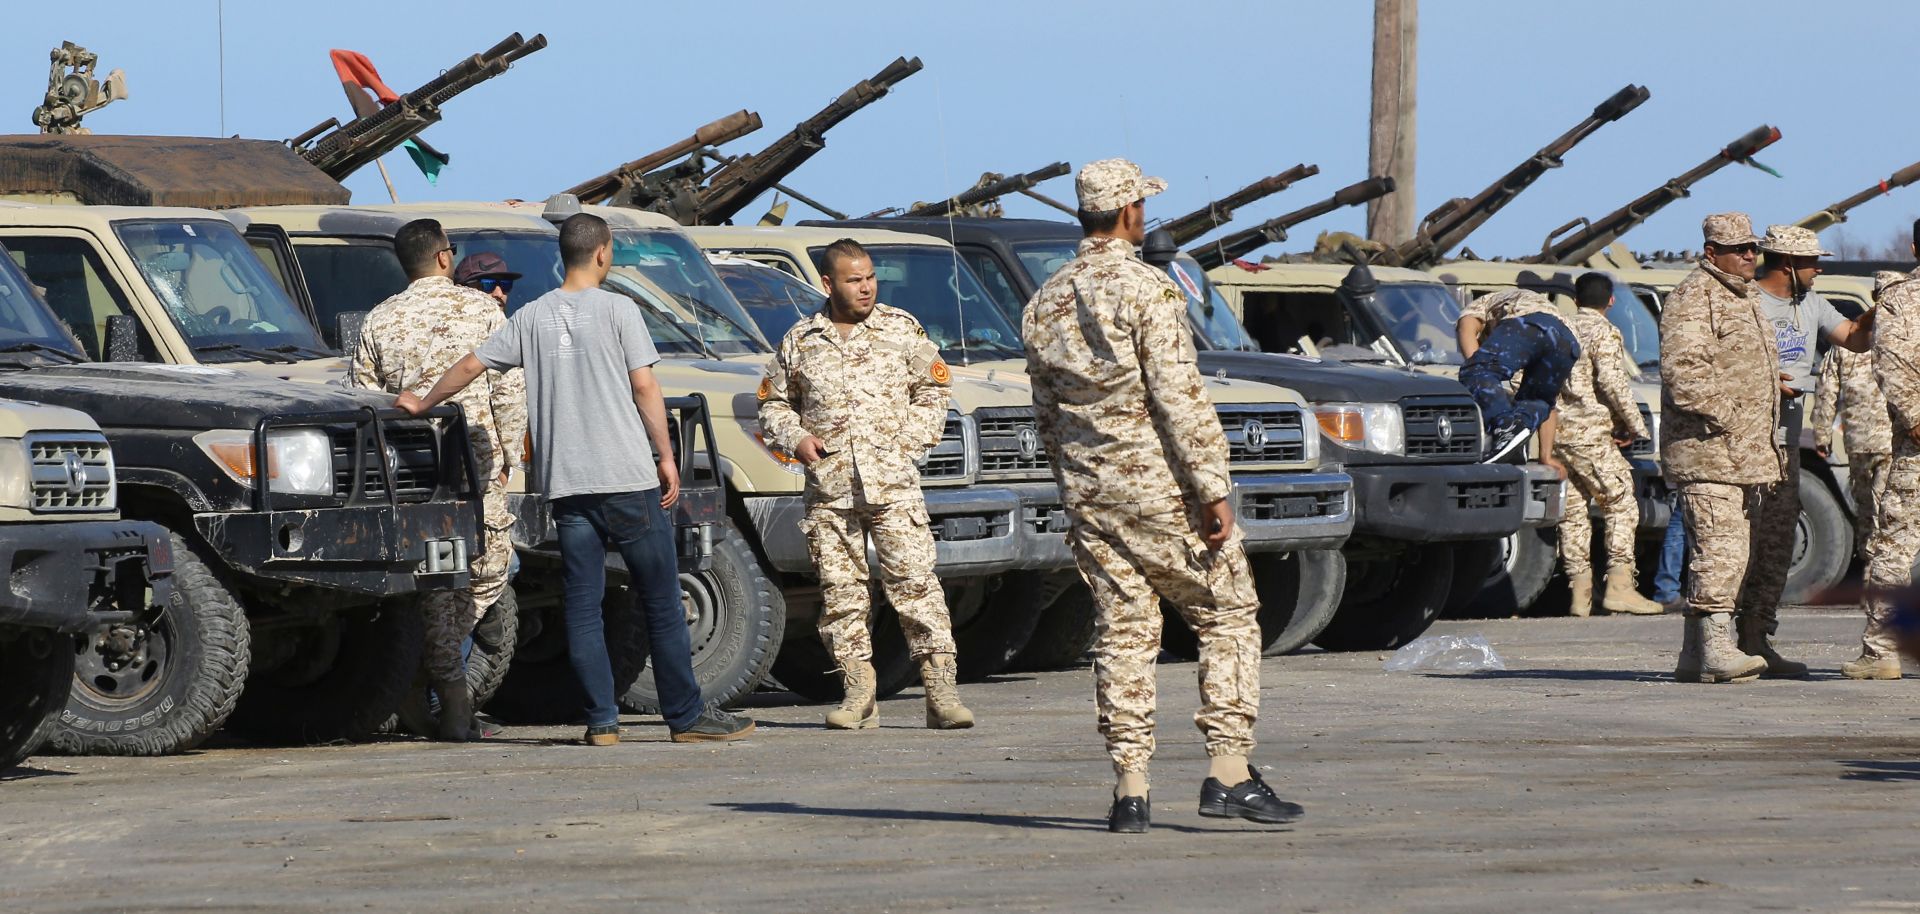 Militia members from Misrata, who support Libya's Government of National Accord, arrive in a Tripoli suburb on April 6, 2019, ready to defend the capital from an assault by the Libyan National Army, led by Field Marshal Khalifa Hifter.